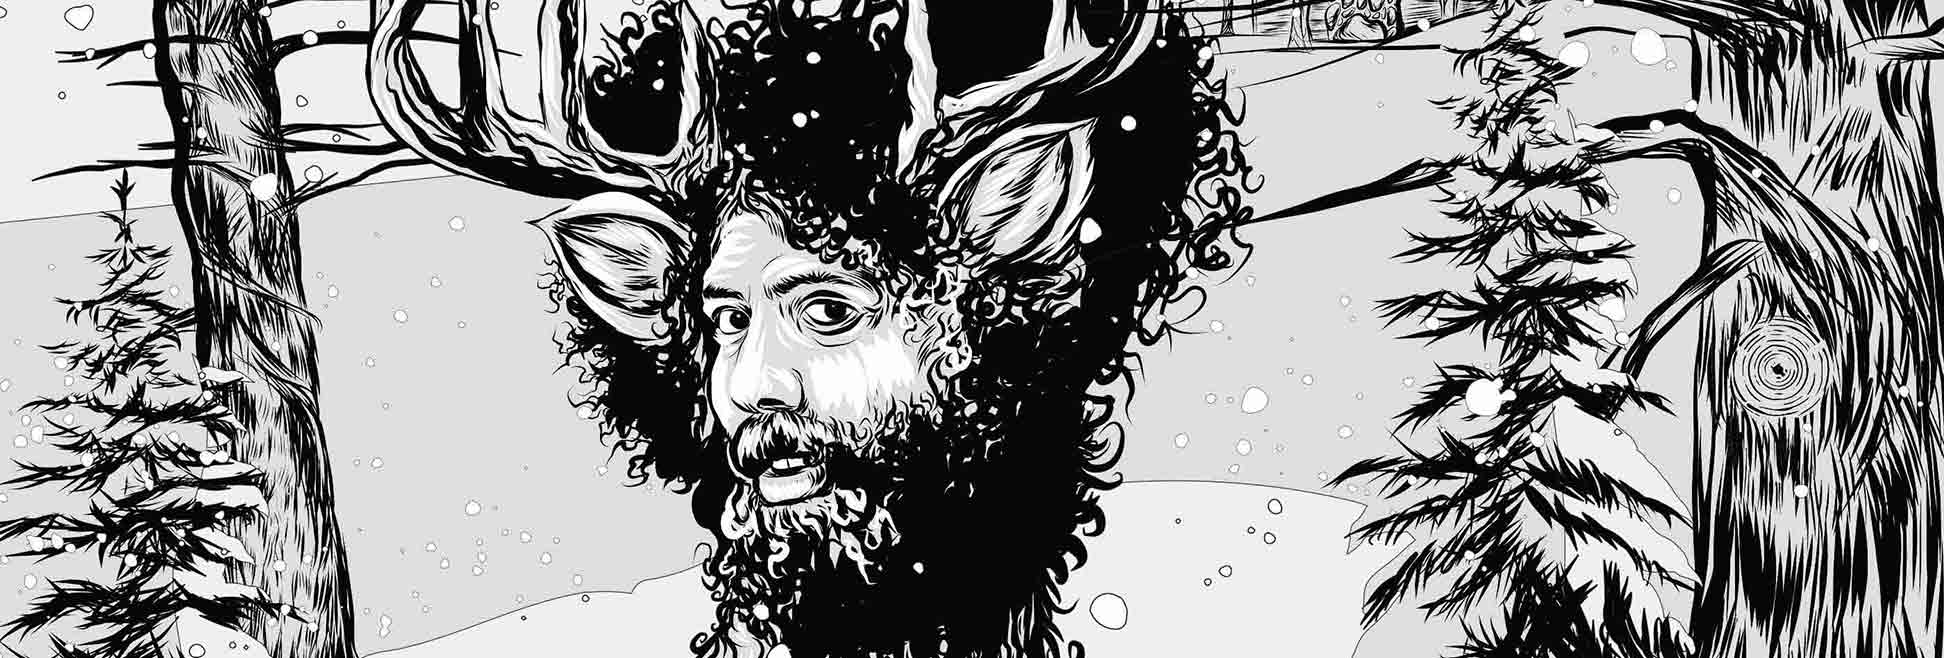 Things to Do: Reggie Watts as a Winter Wonderland Deer Coloring Page Image